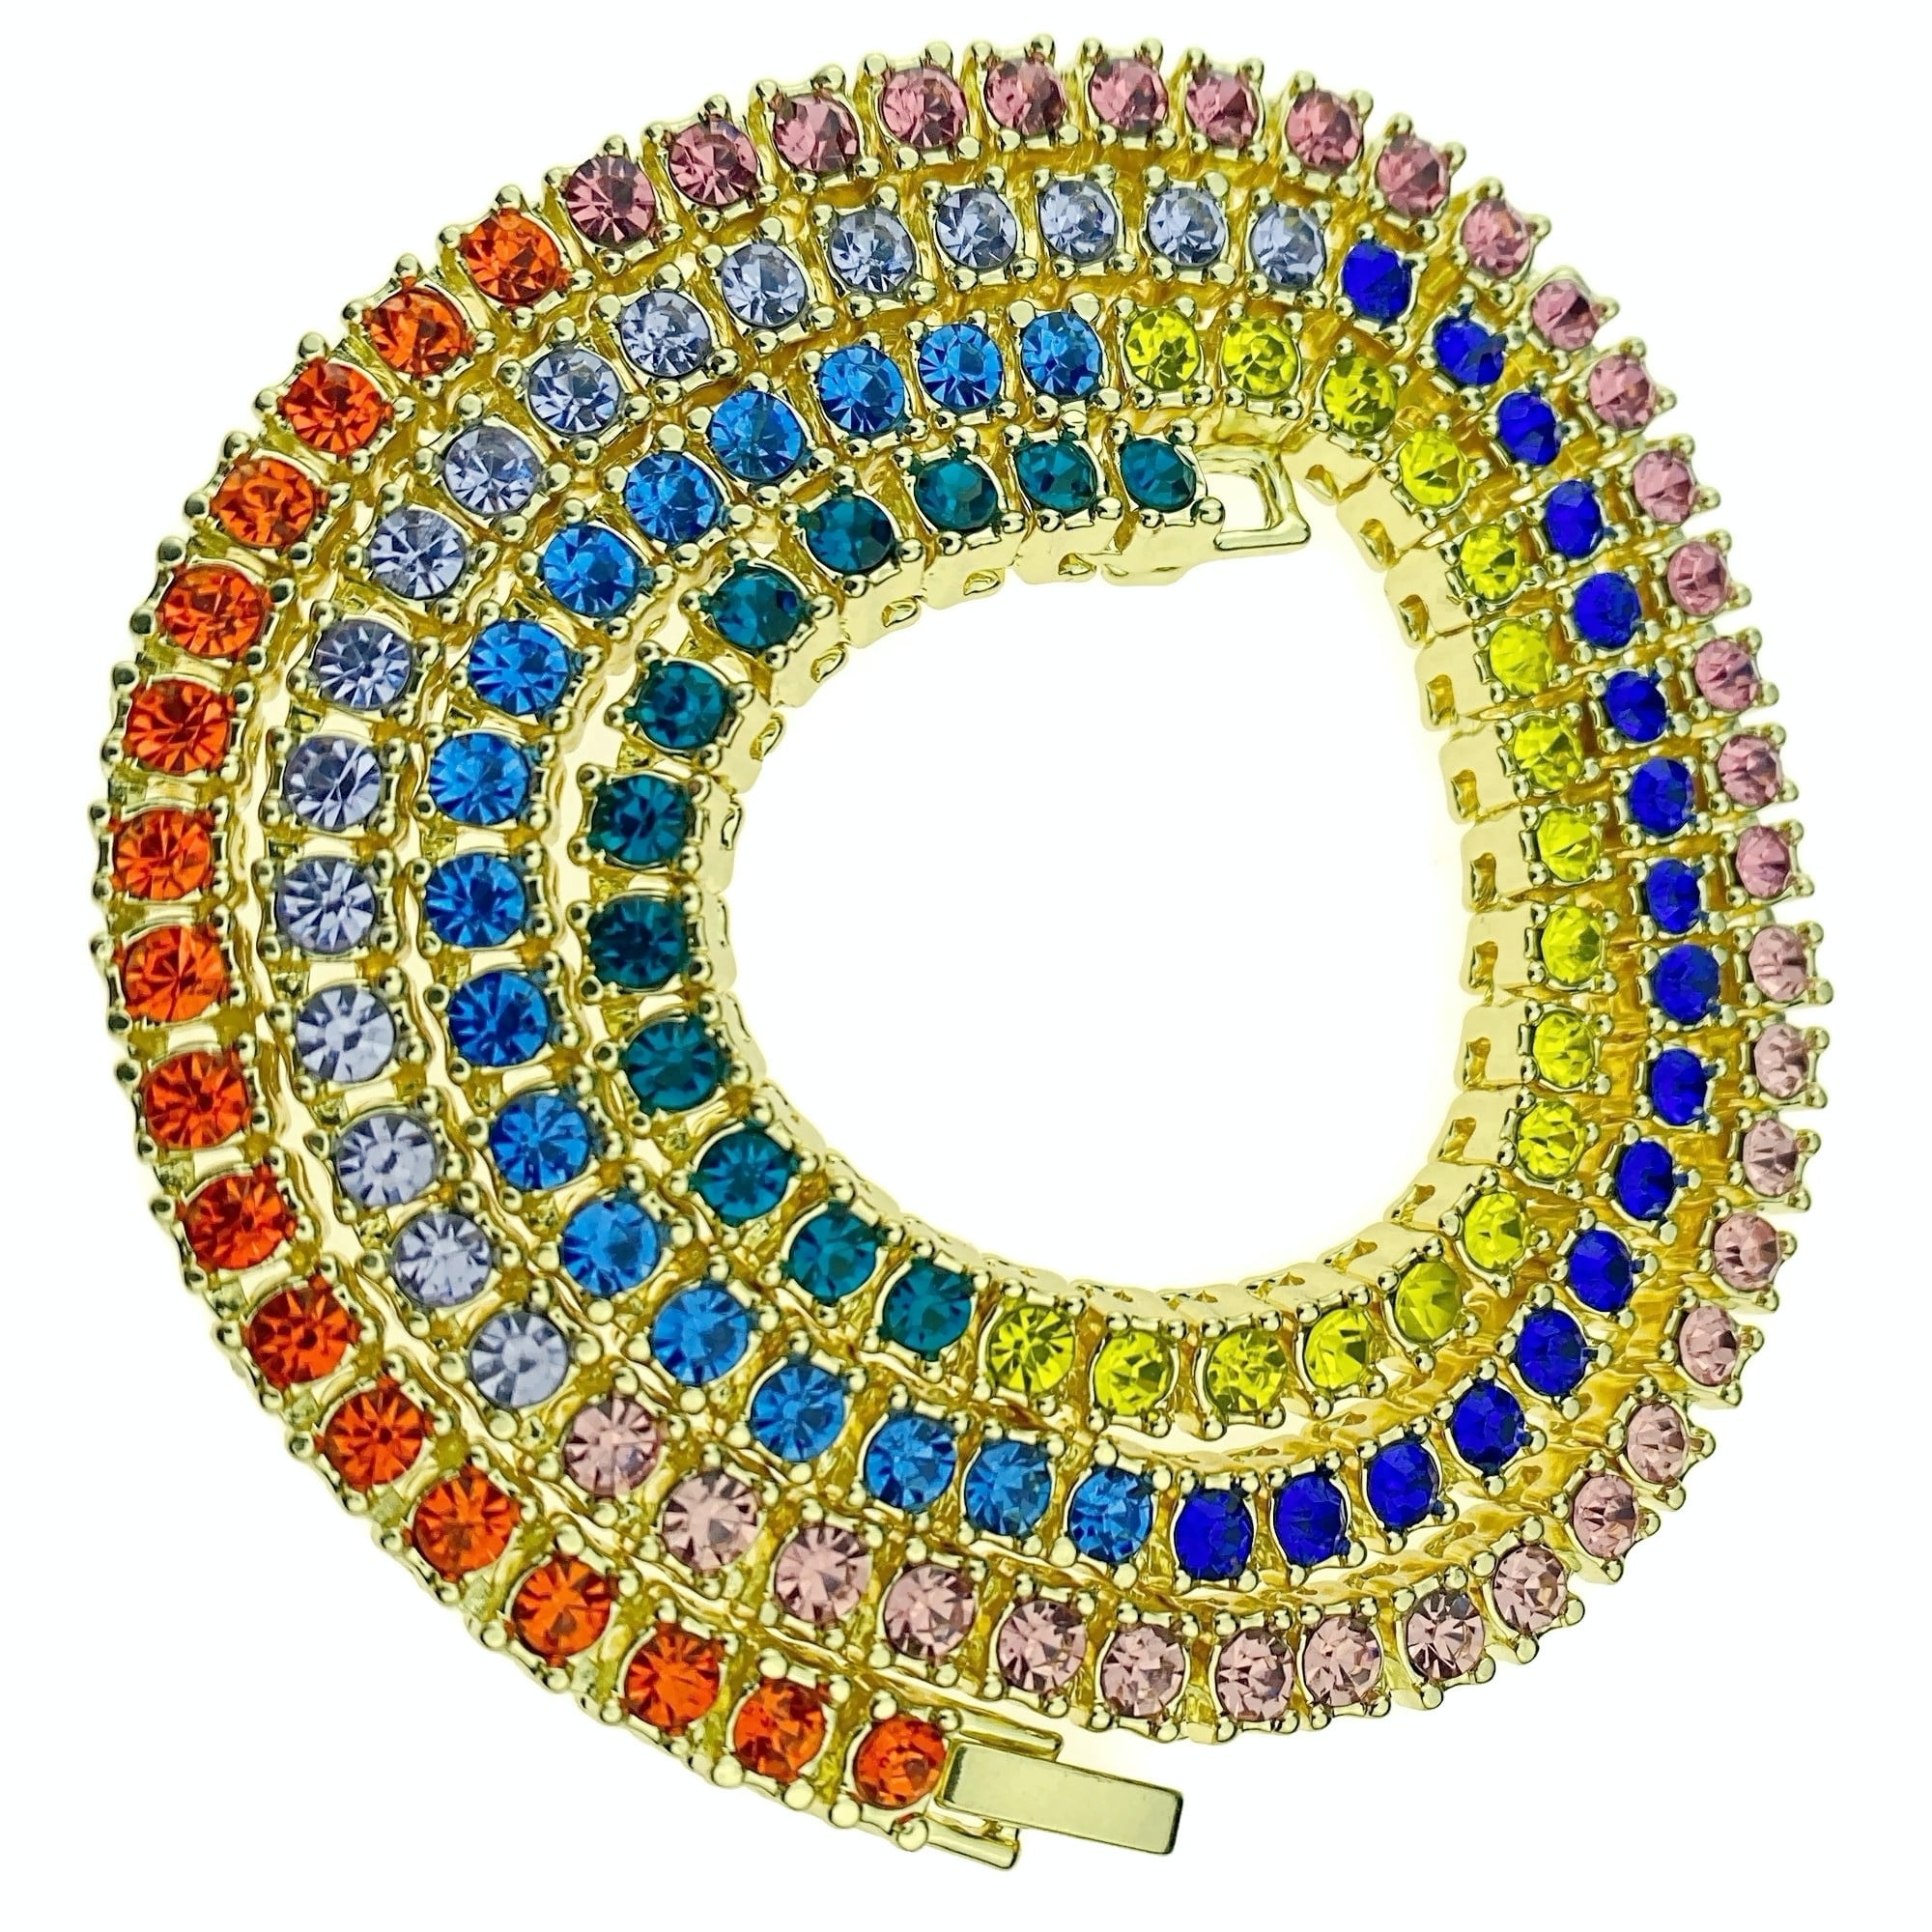 apop nyc Rainbow Sequins Sterling Silver Tri-Tone Chain Necklace 24 inch